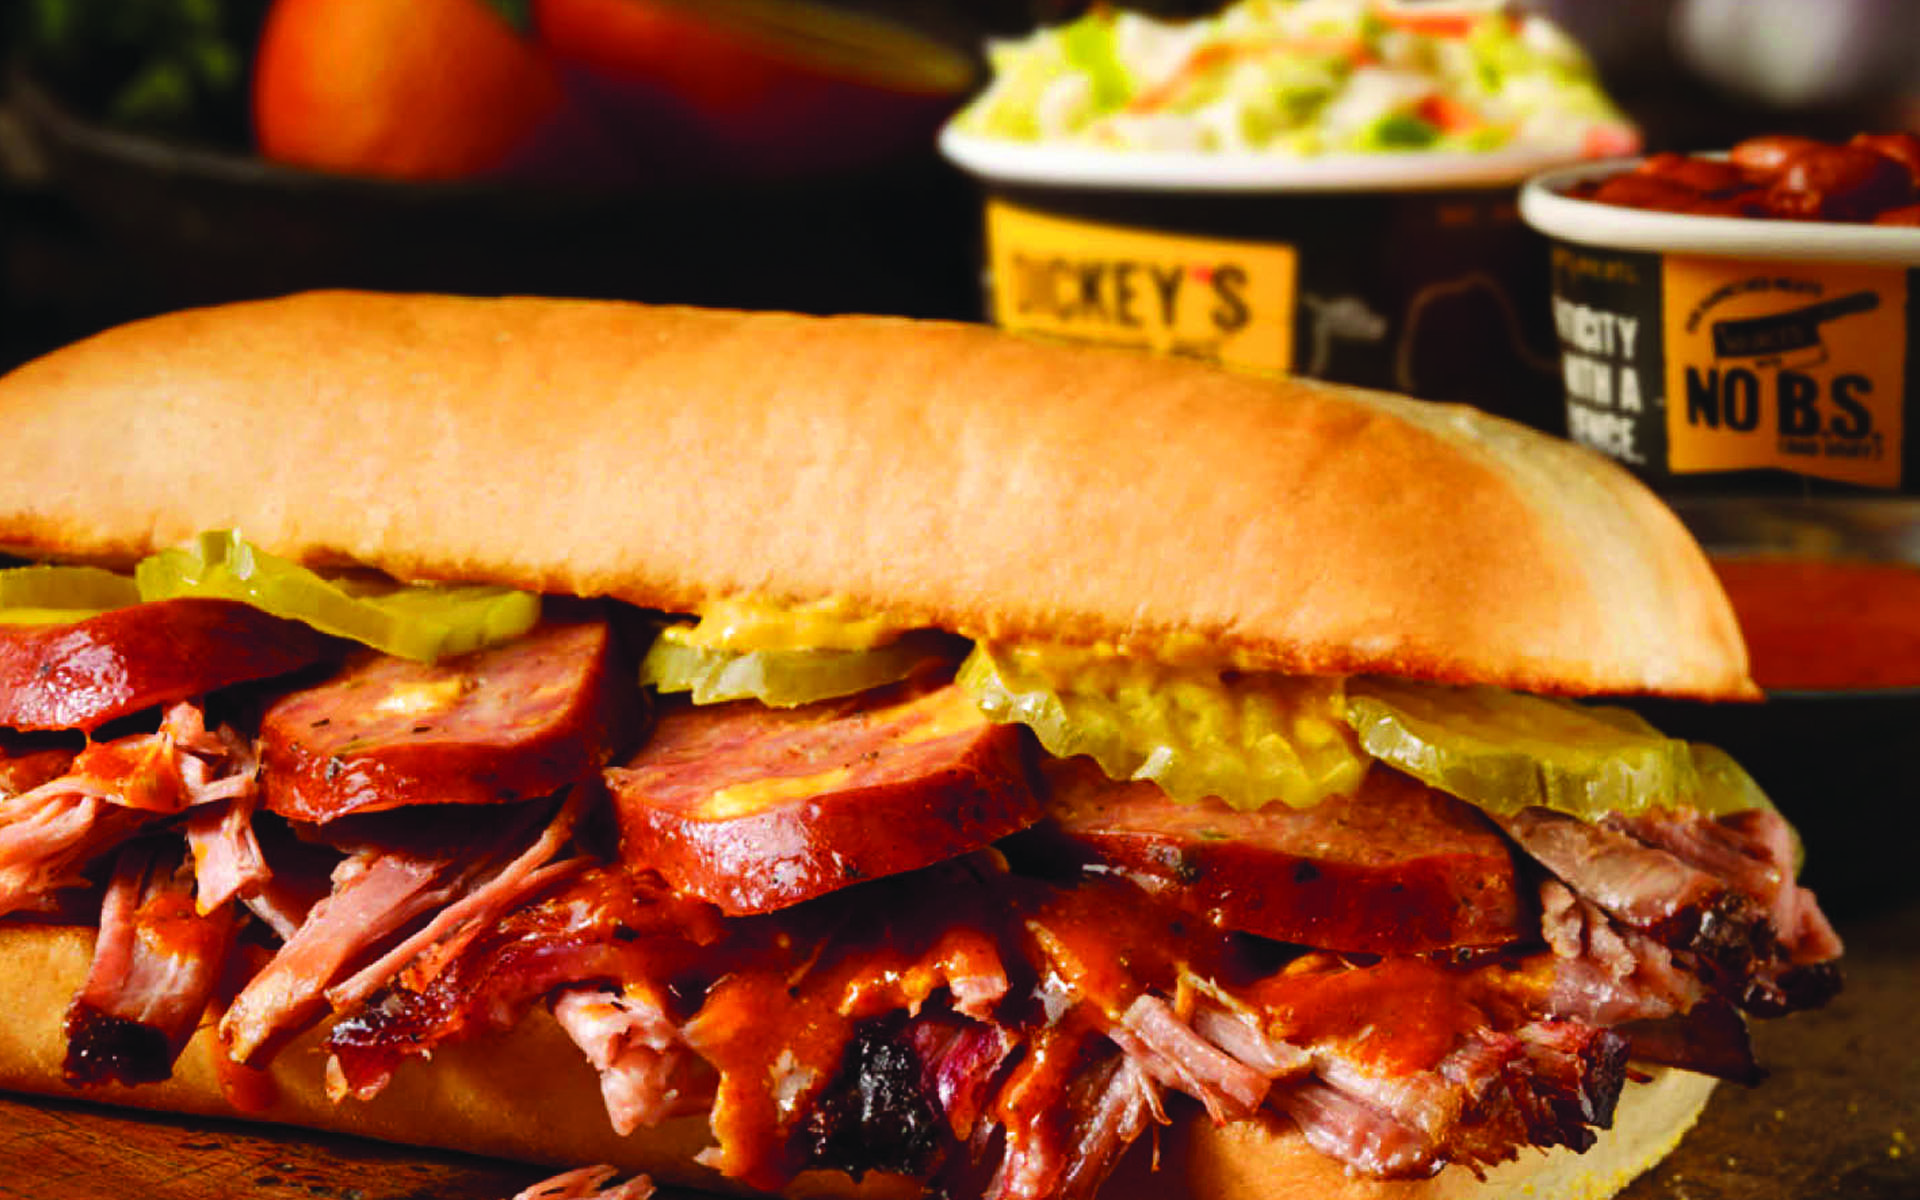 Dickey's Barbecue Pit in Meridian, ID at Restaurant.com